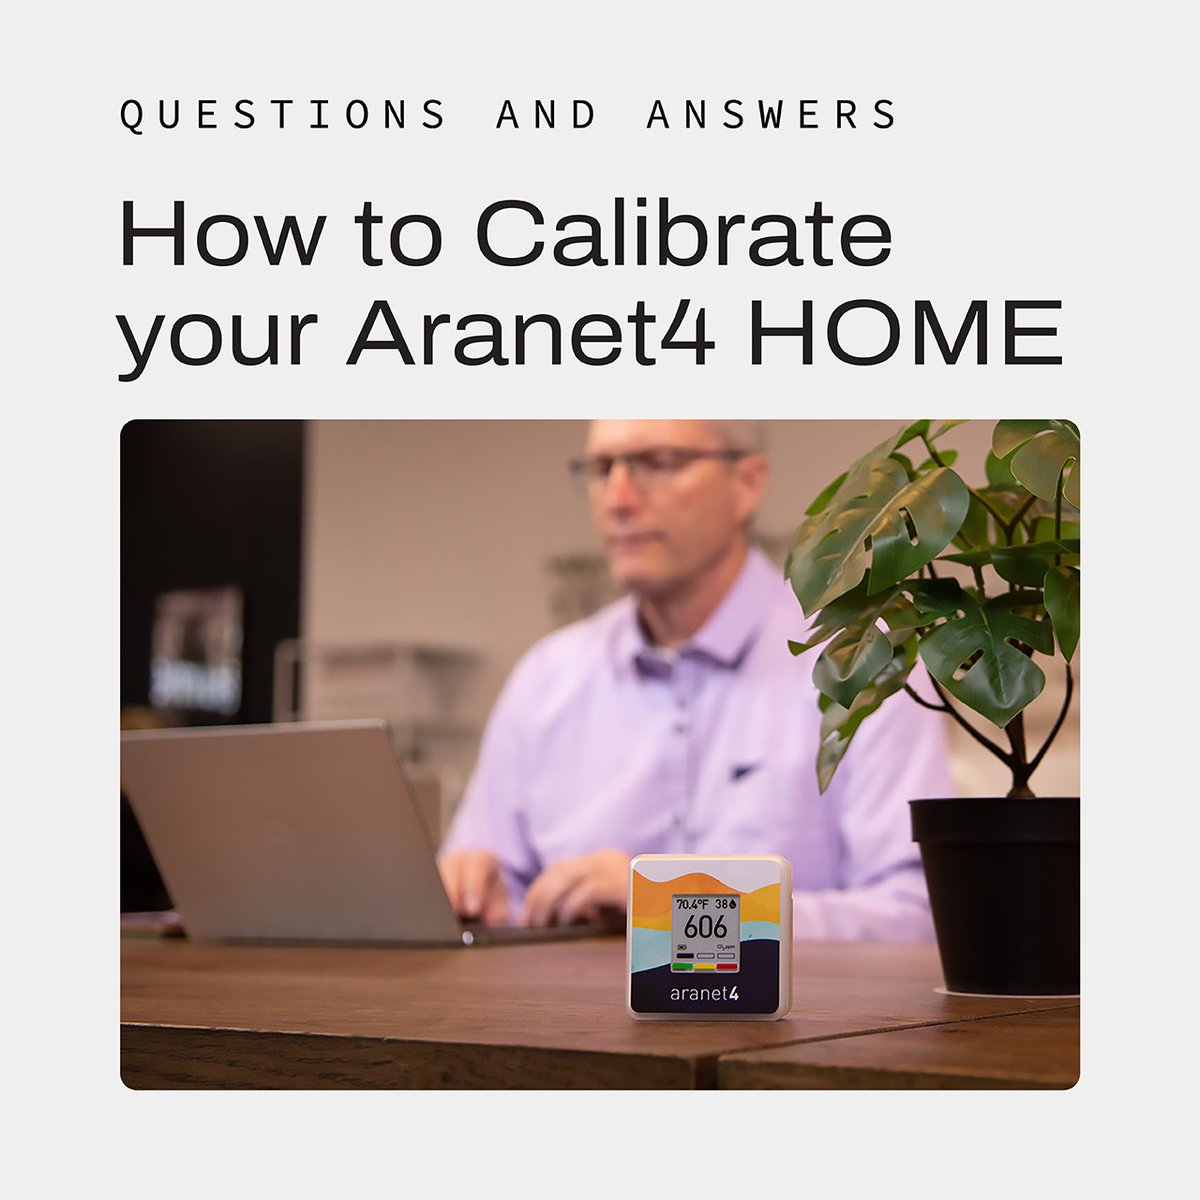 Everything you should know about calibrating your Aranet4 HOME. 🤔 Firstly, your Aranet4 HOME device comes to you already calibrated and the margin of error is approximately 30 ppm per year. Therefore, there is no need to calibrate your device for at least the first 3 years.